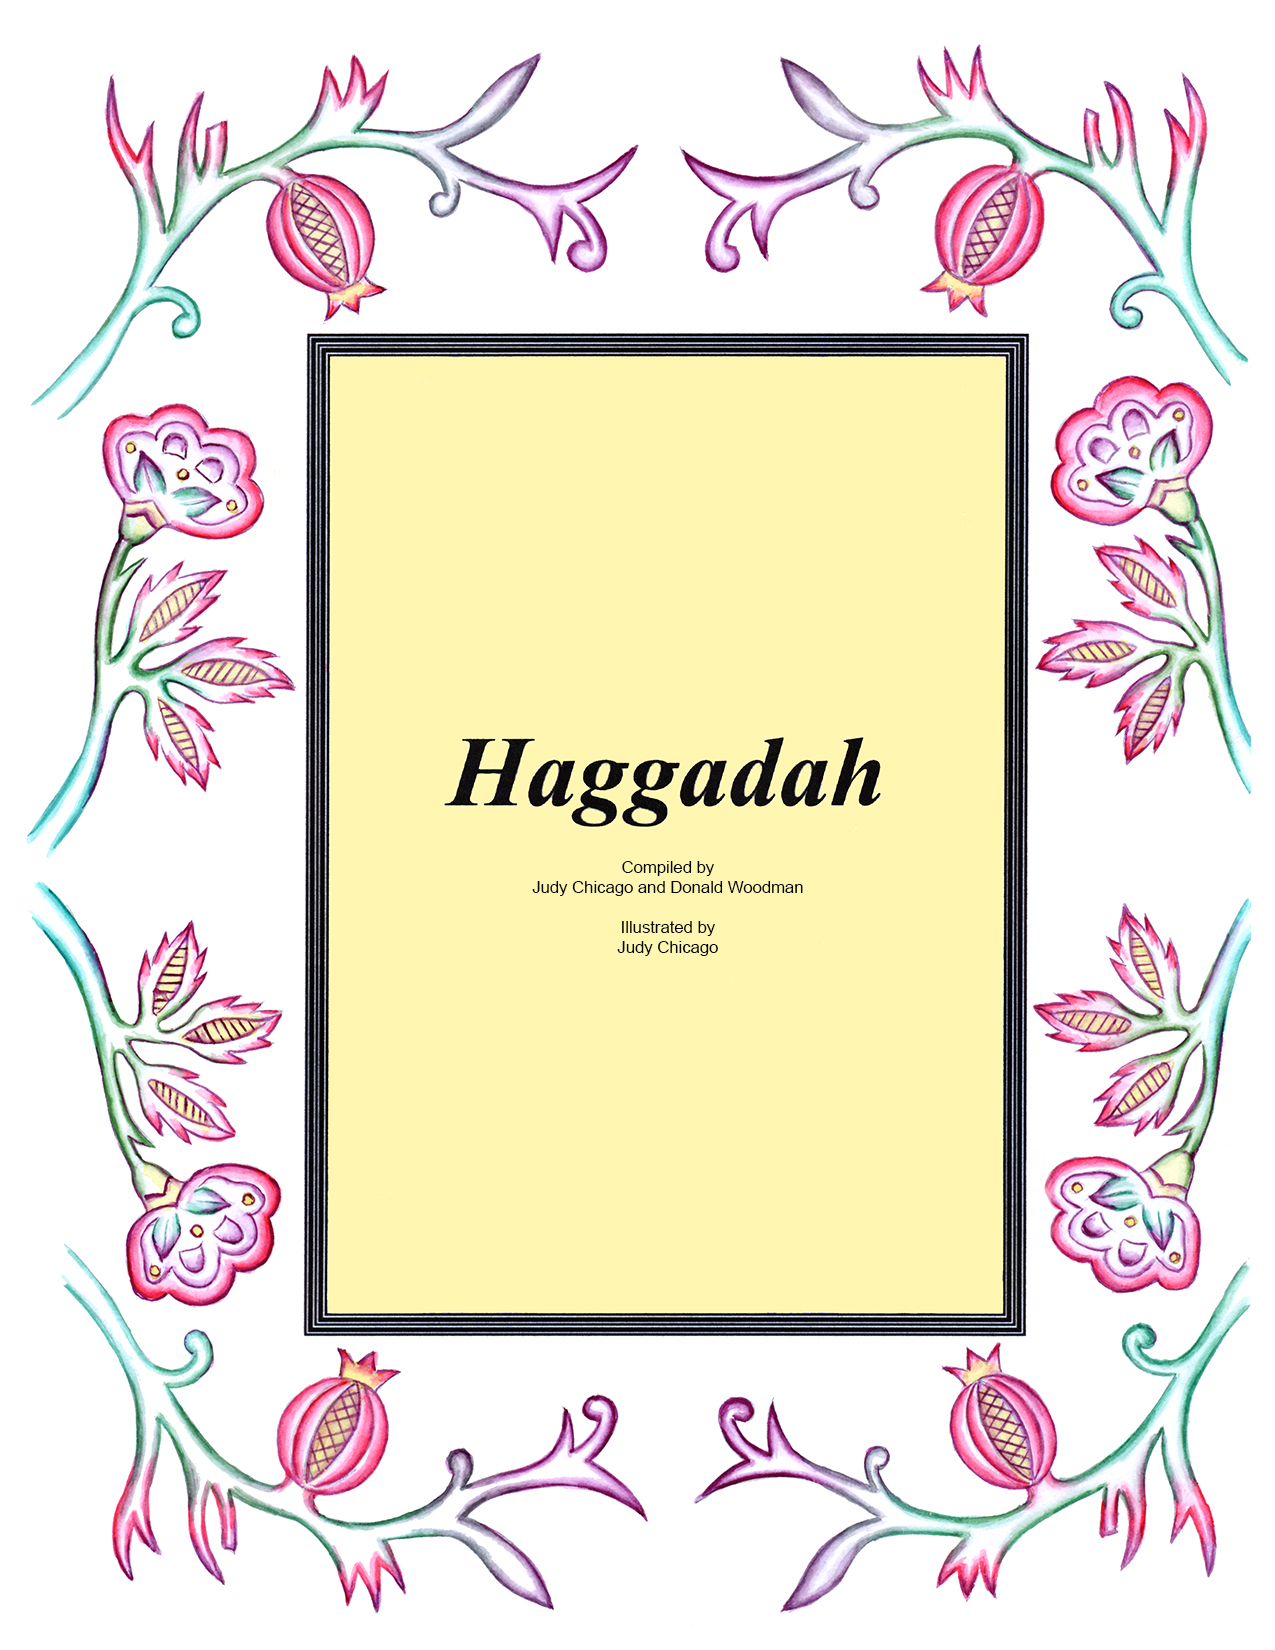 Cover - The Chicago / Woodman Haggadah